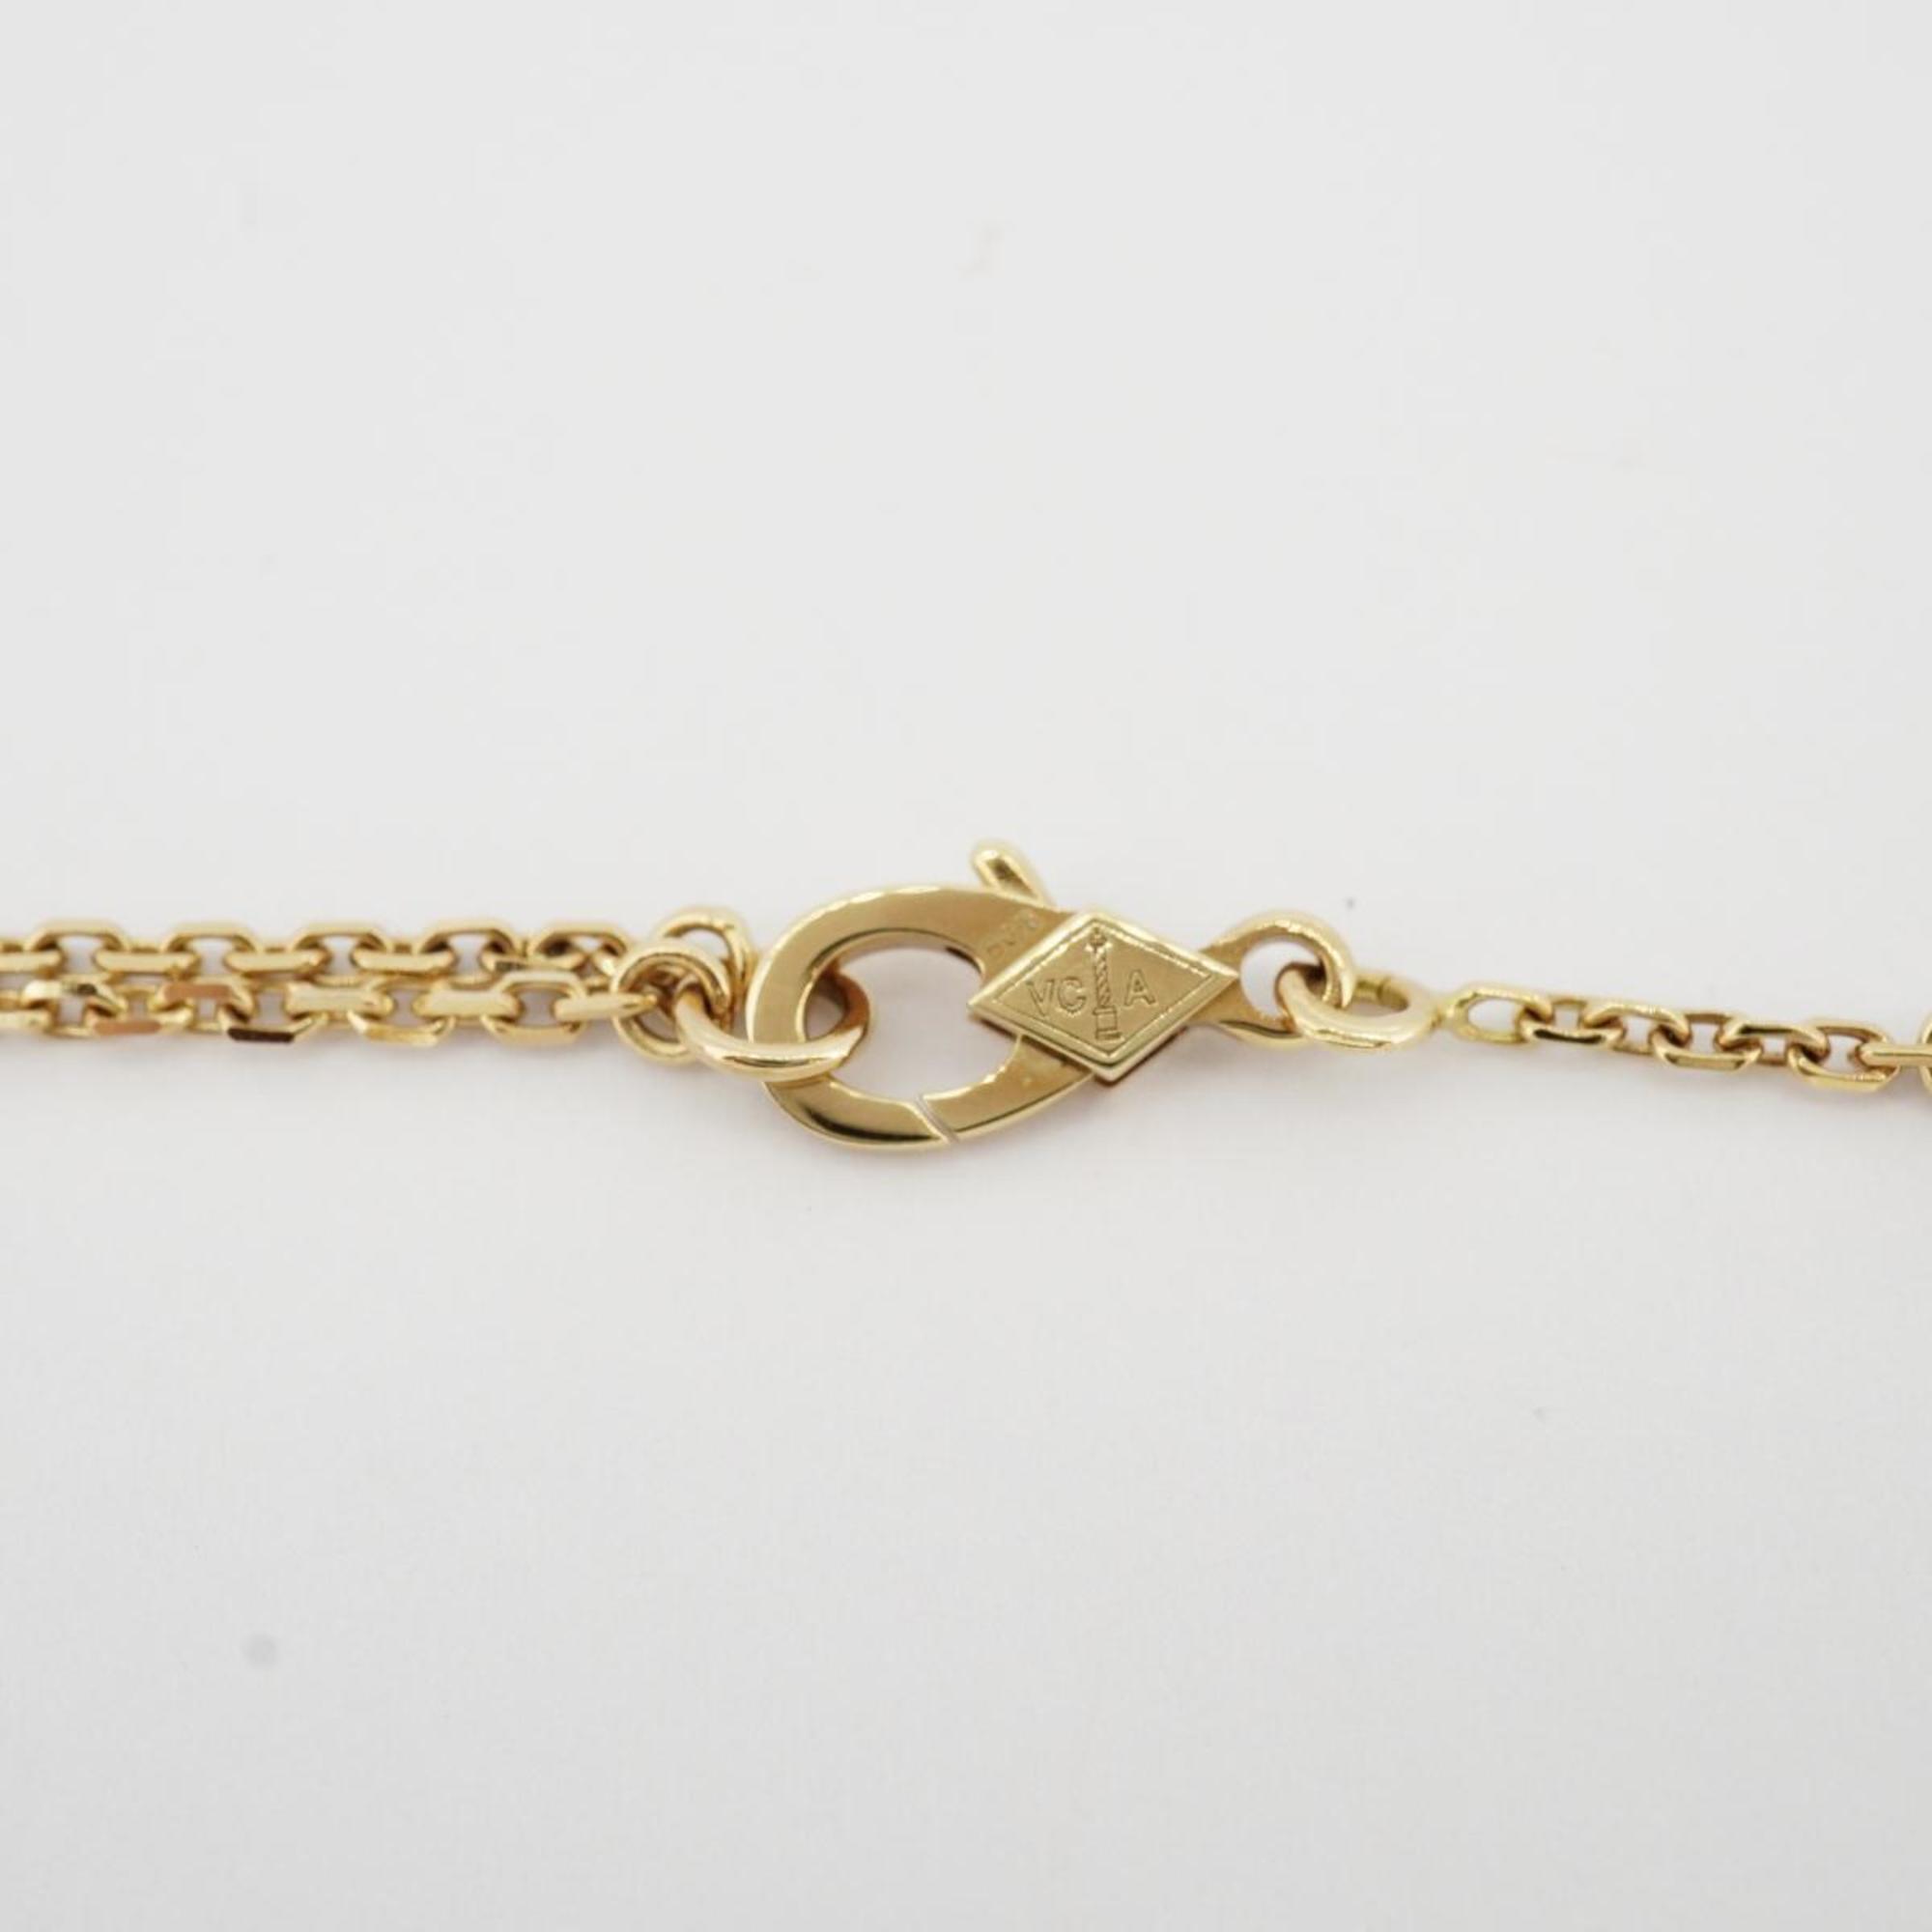 Van Cleef & Arpels Necklace Alhambra K18YG Yellow Gold Shell Women's